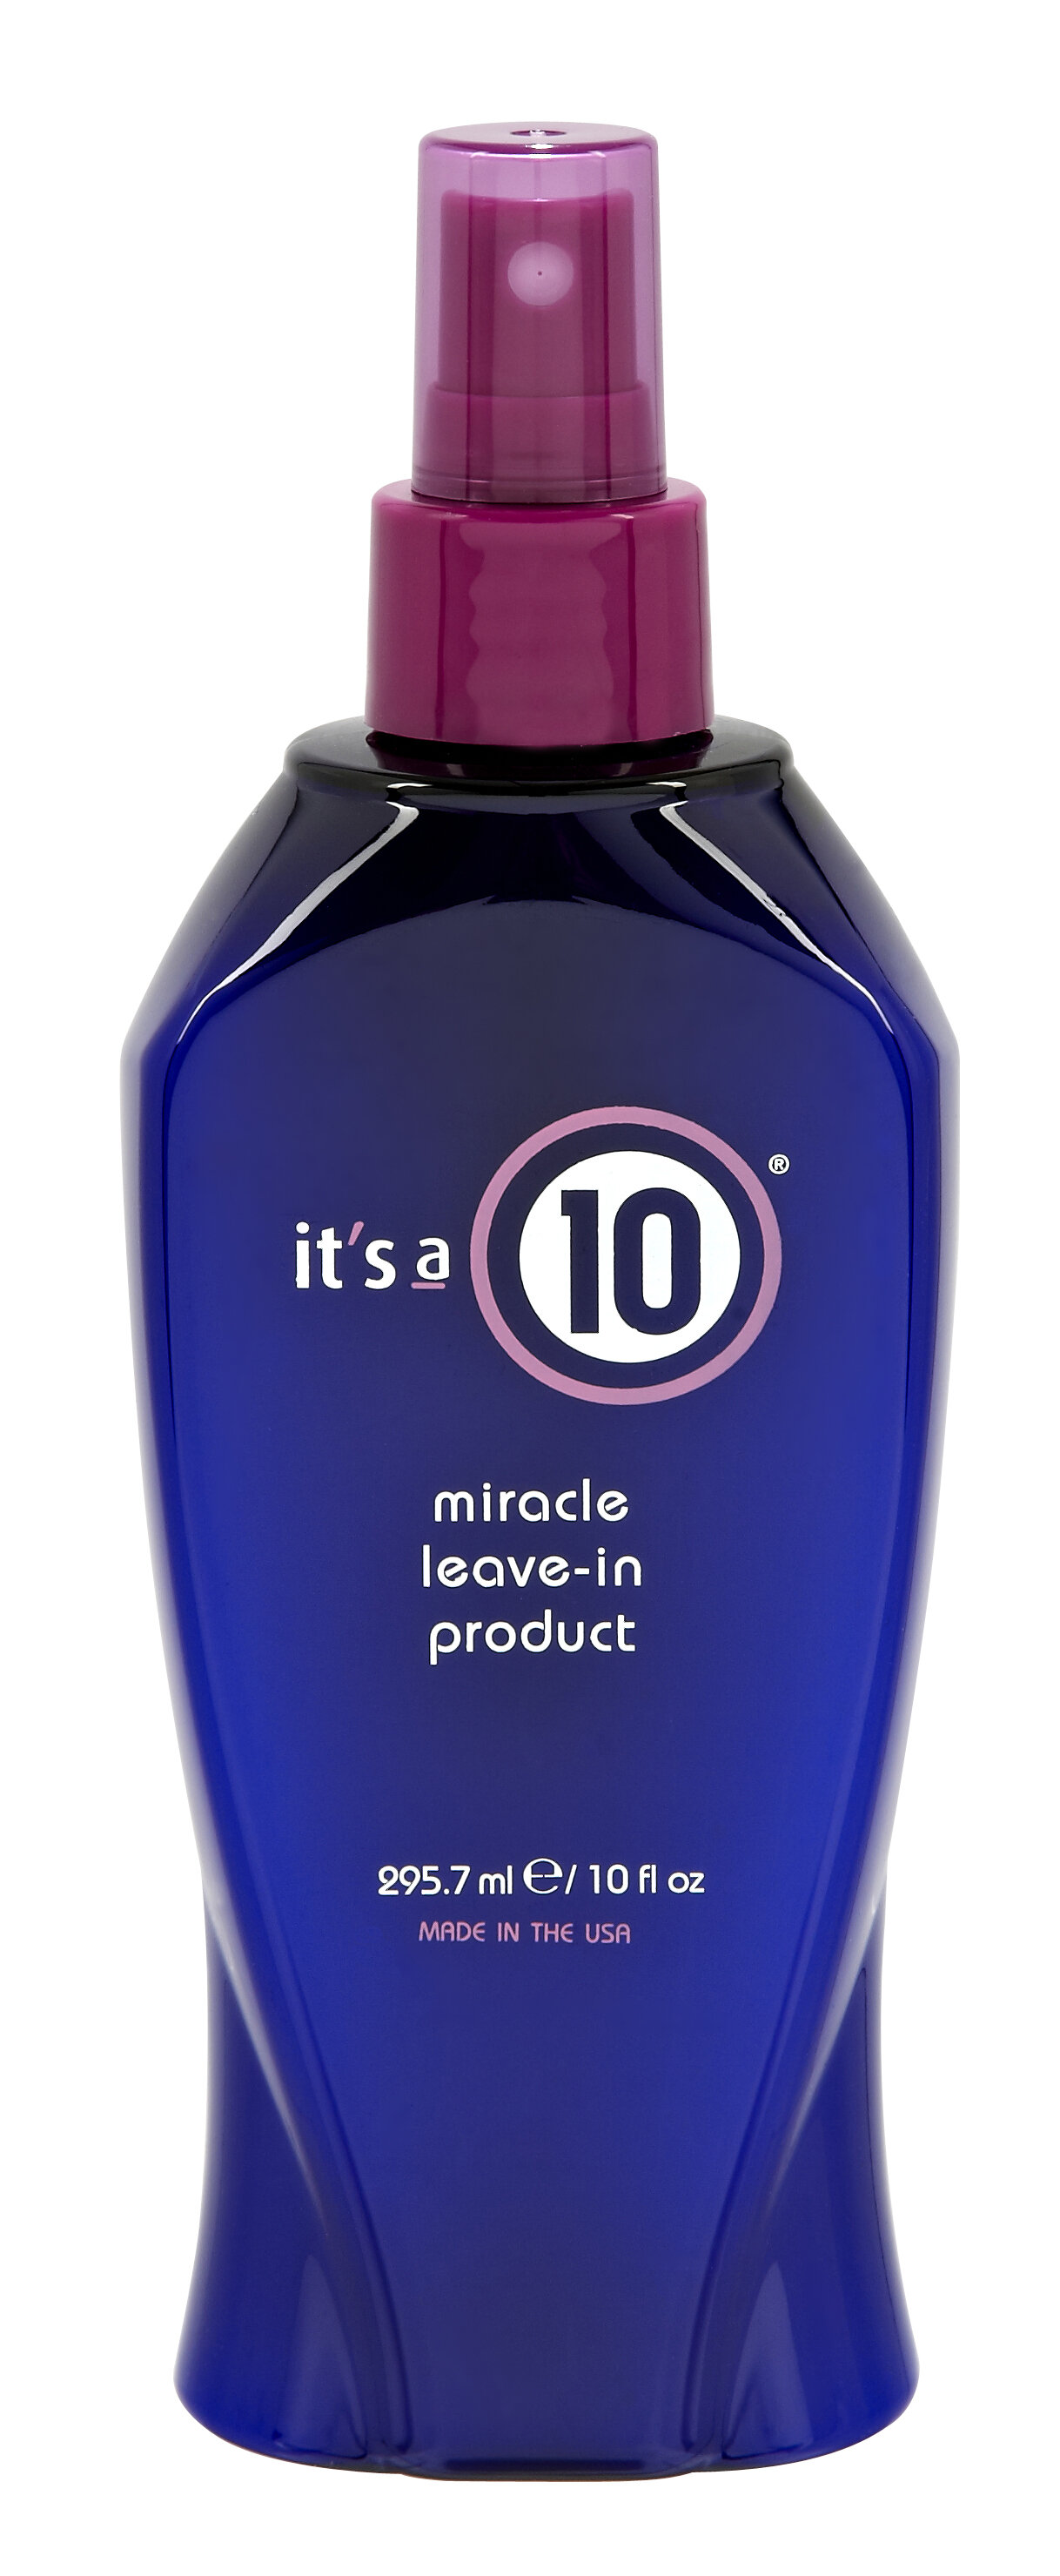 It's A 10 Miracle Leave-In Conditioner Product, 10 Oz